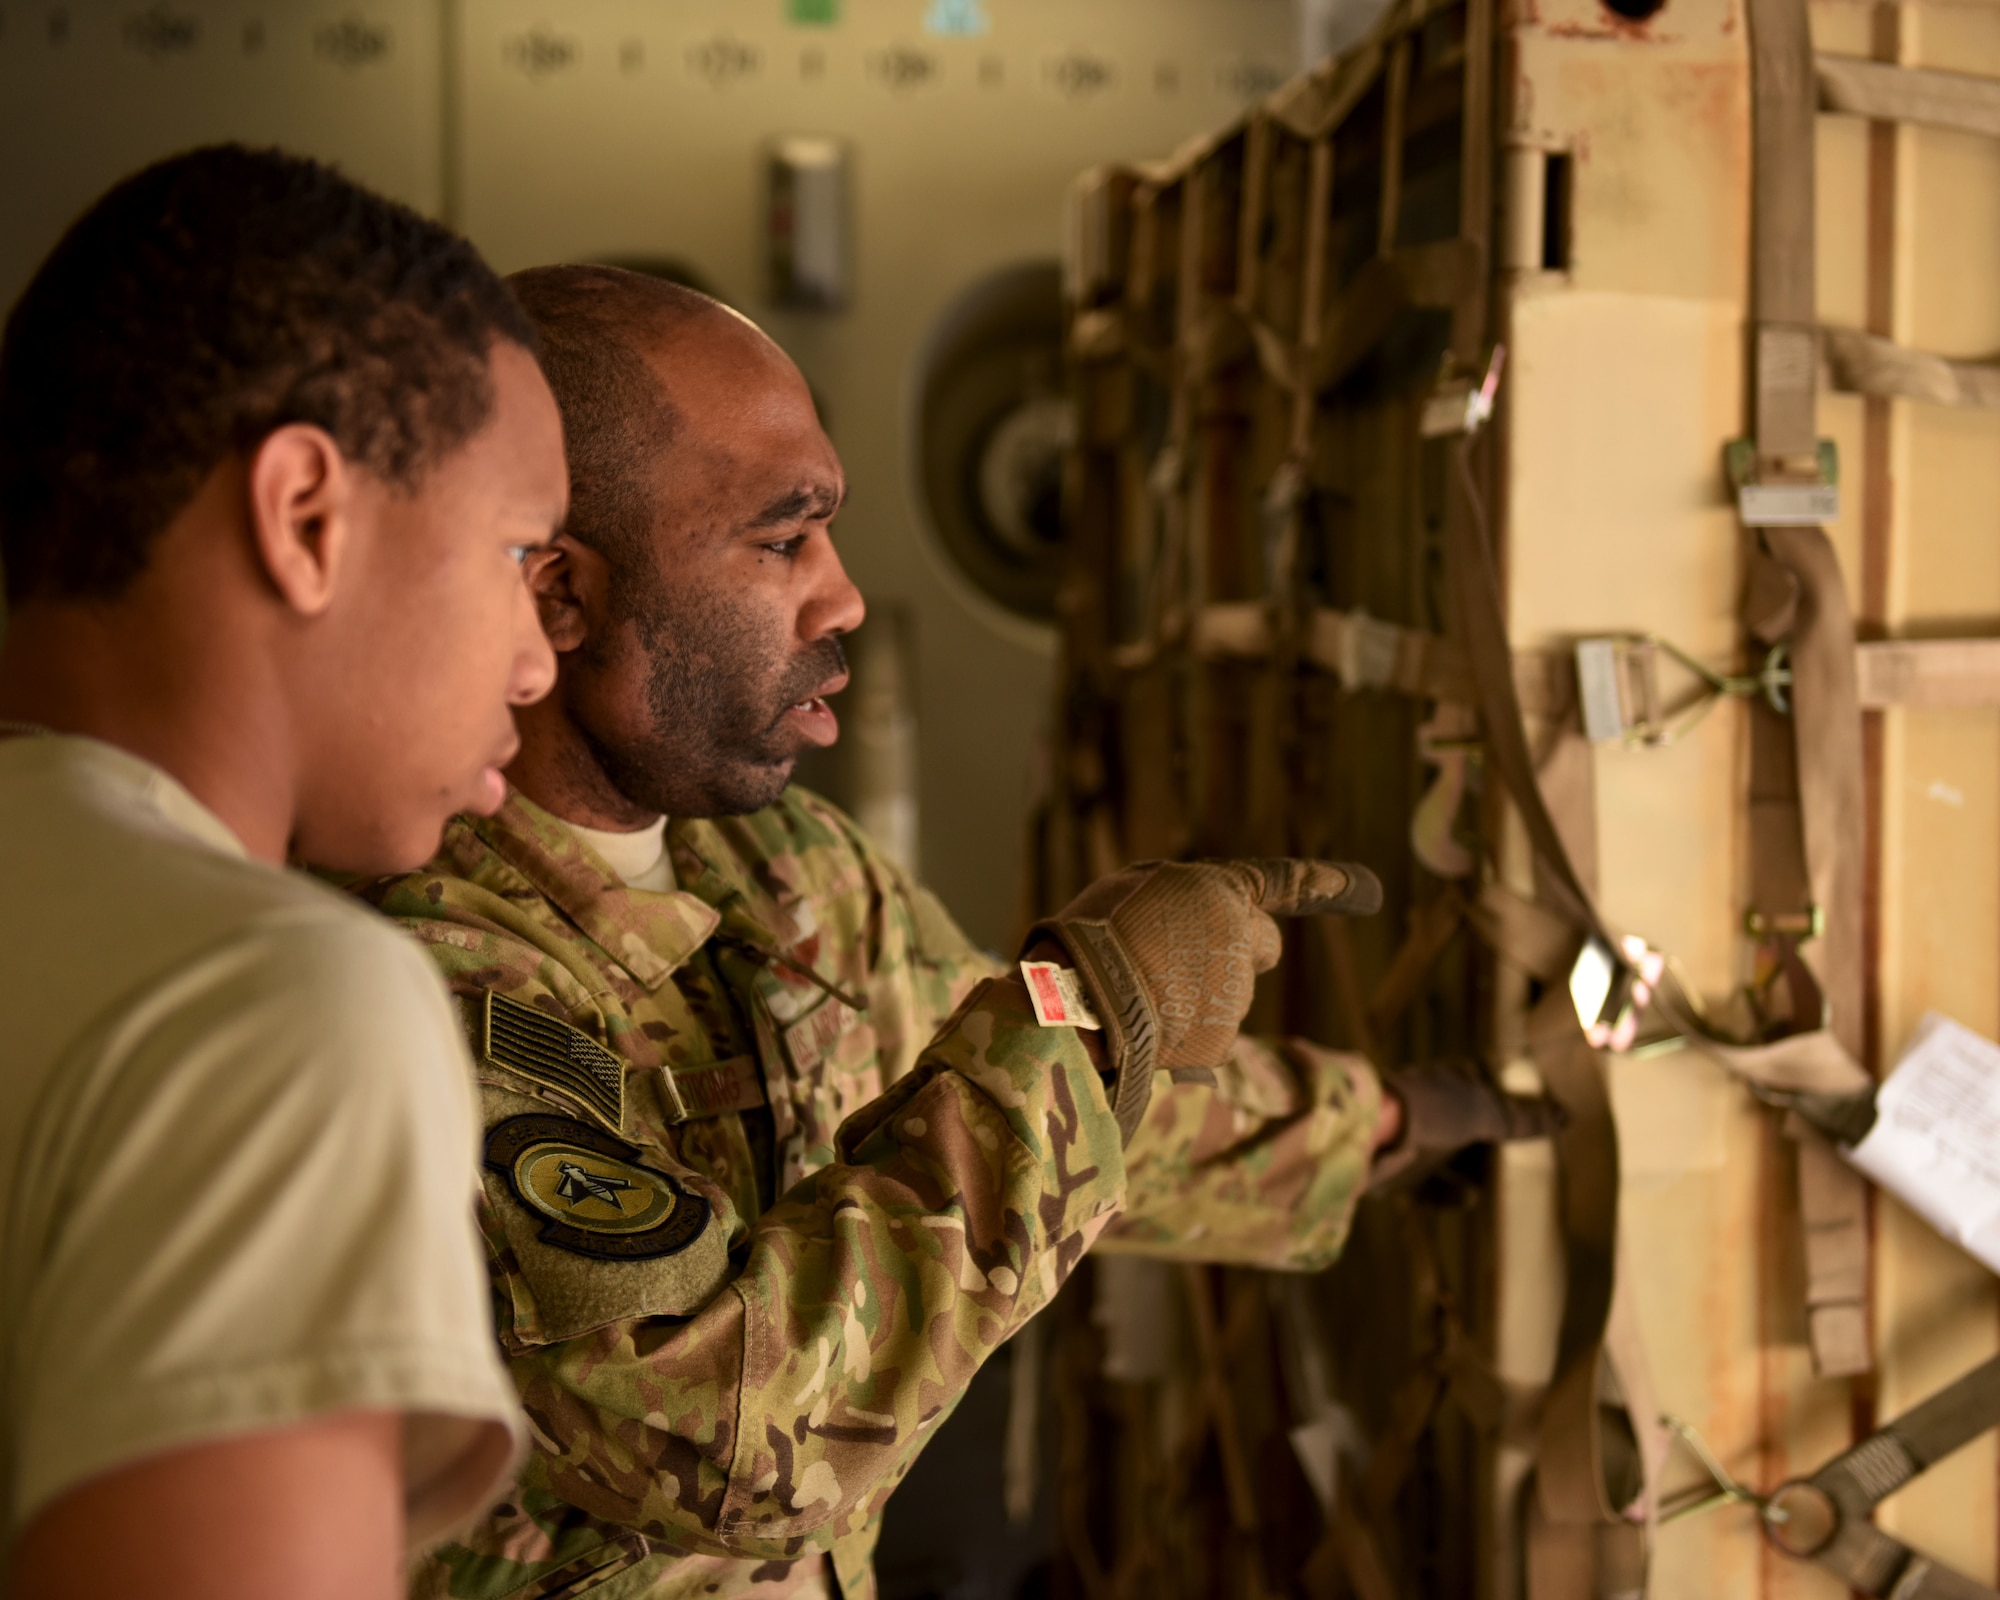 U.S. Air Force Staff Sgt. James Armstrong, right, and Airman 1st Class Alan Collier, 21st Airlift Squadron loadmasters, discuss how to offload U.S. Army equipment from a C-17 Globemaster III May 24, 2019, at an undisclosed location. The loadmasters are responsible for ensuring all cargo and passengers on the C-17 are ready for tactical and strategic airlift mission around the world. (U.S. Air Force photo by 2nd Lt. R. Michael Longoria)